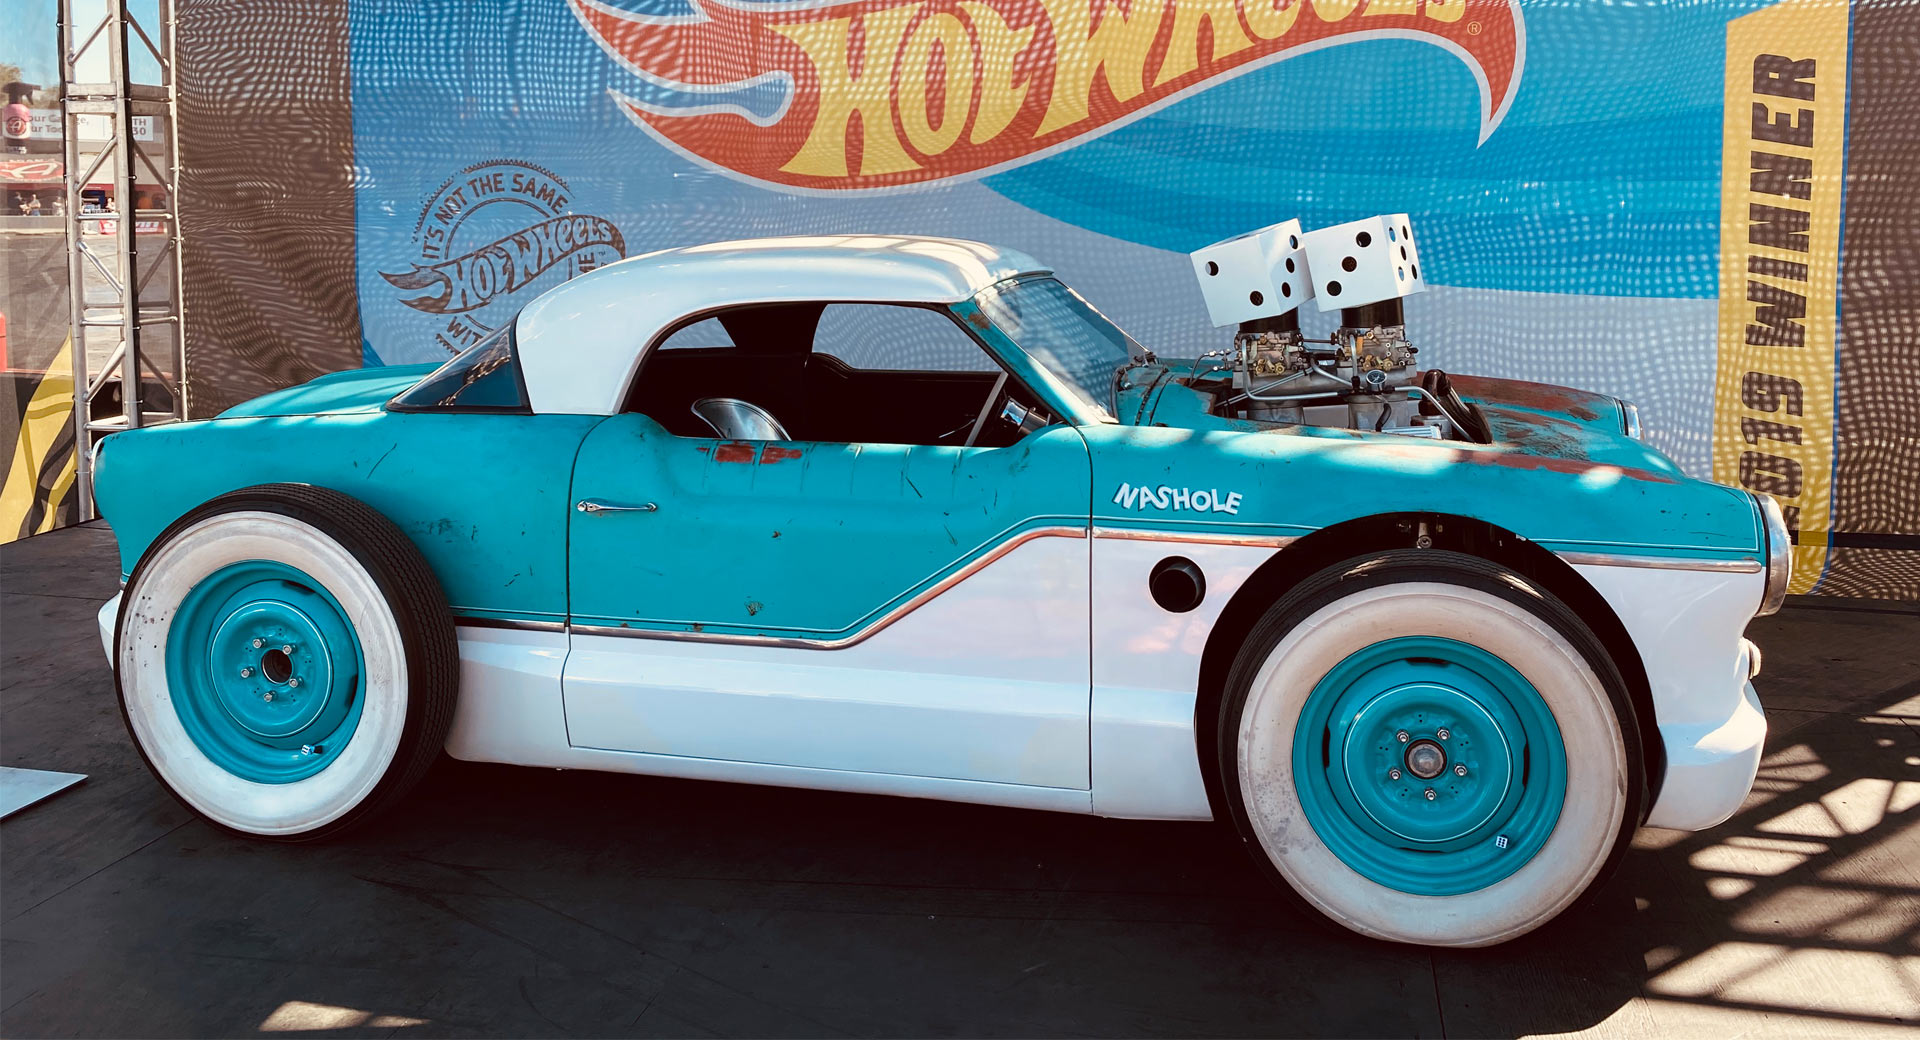 Meet The Nashole, This Year's Winner Of The Hot Wheels Legends Tour